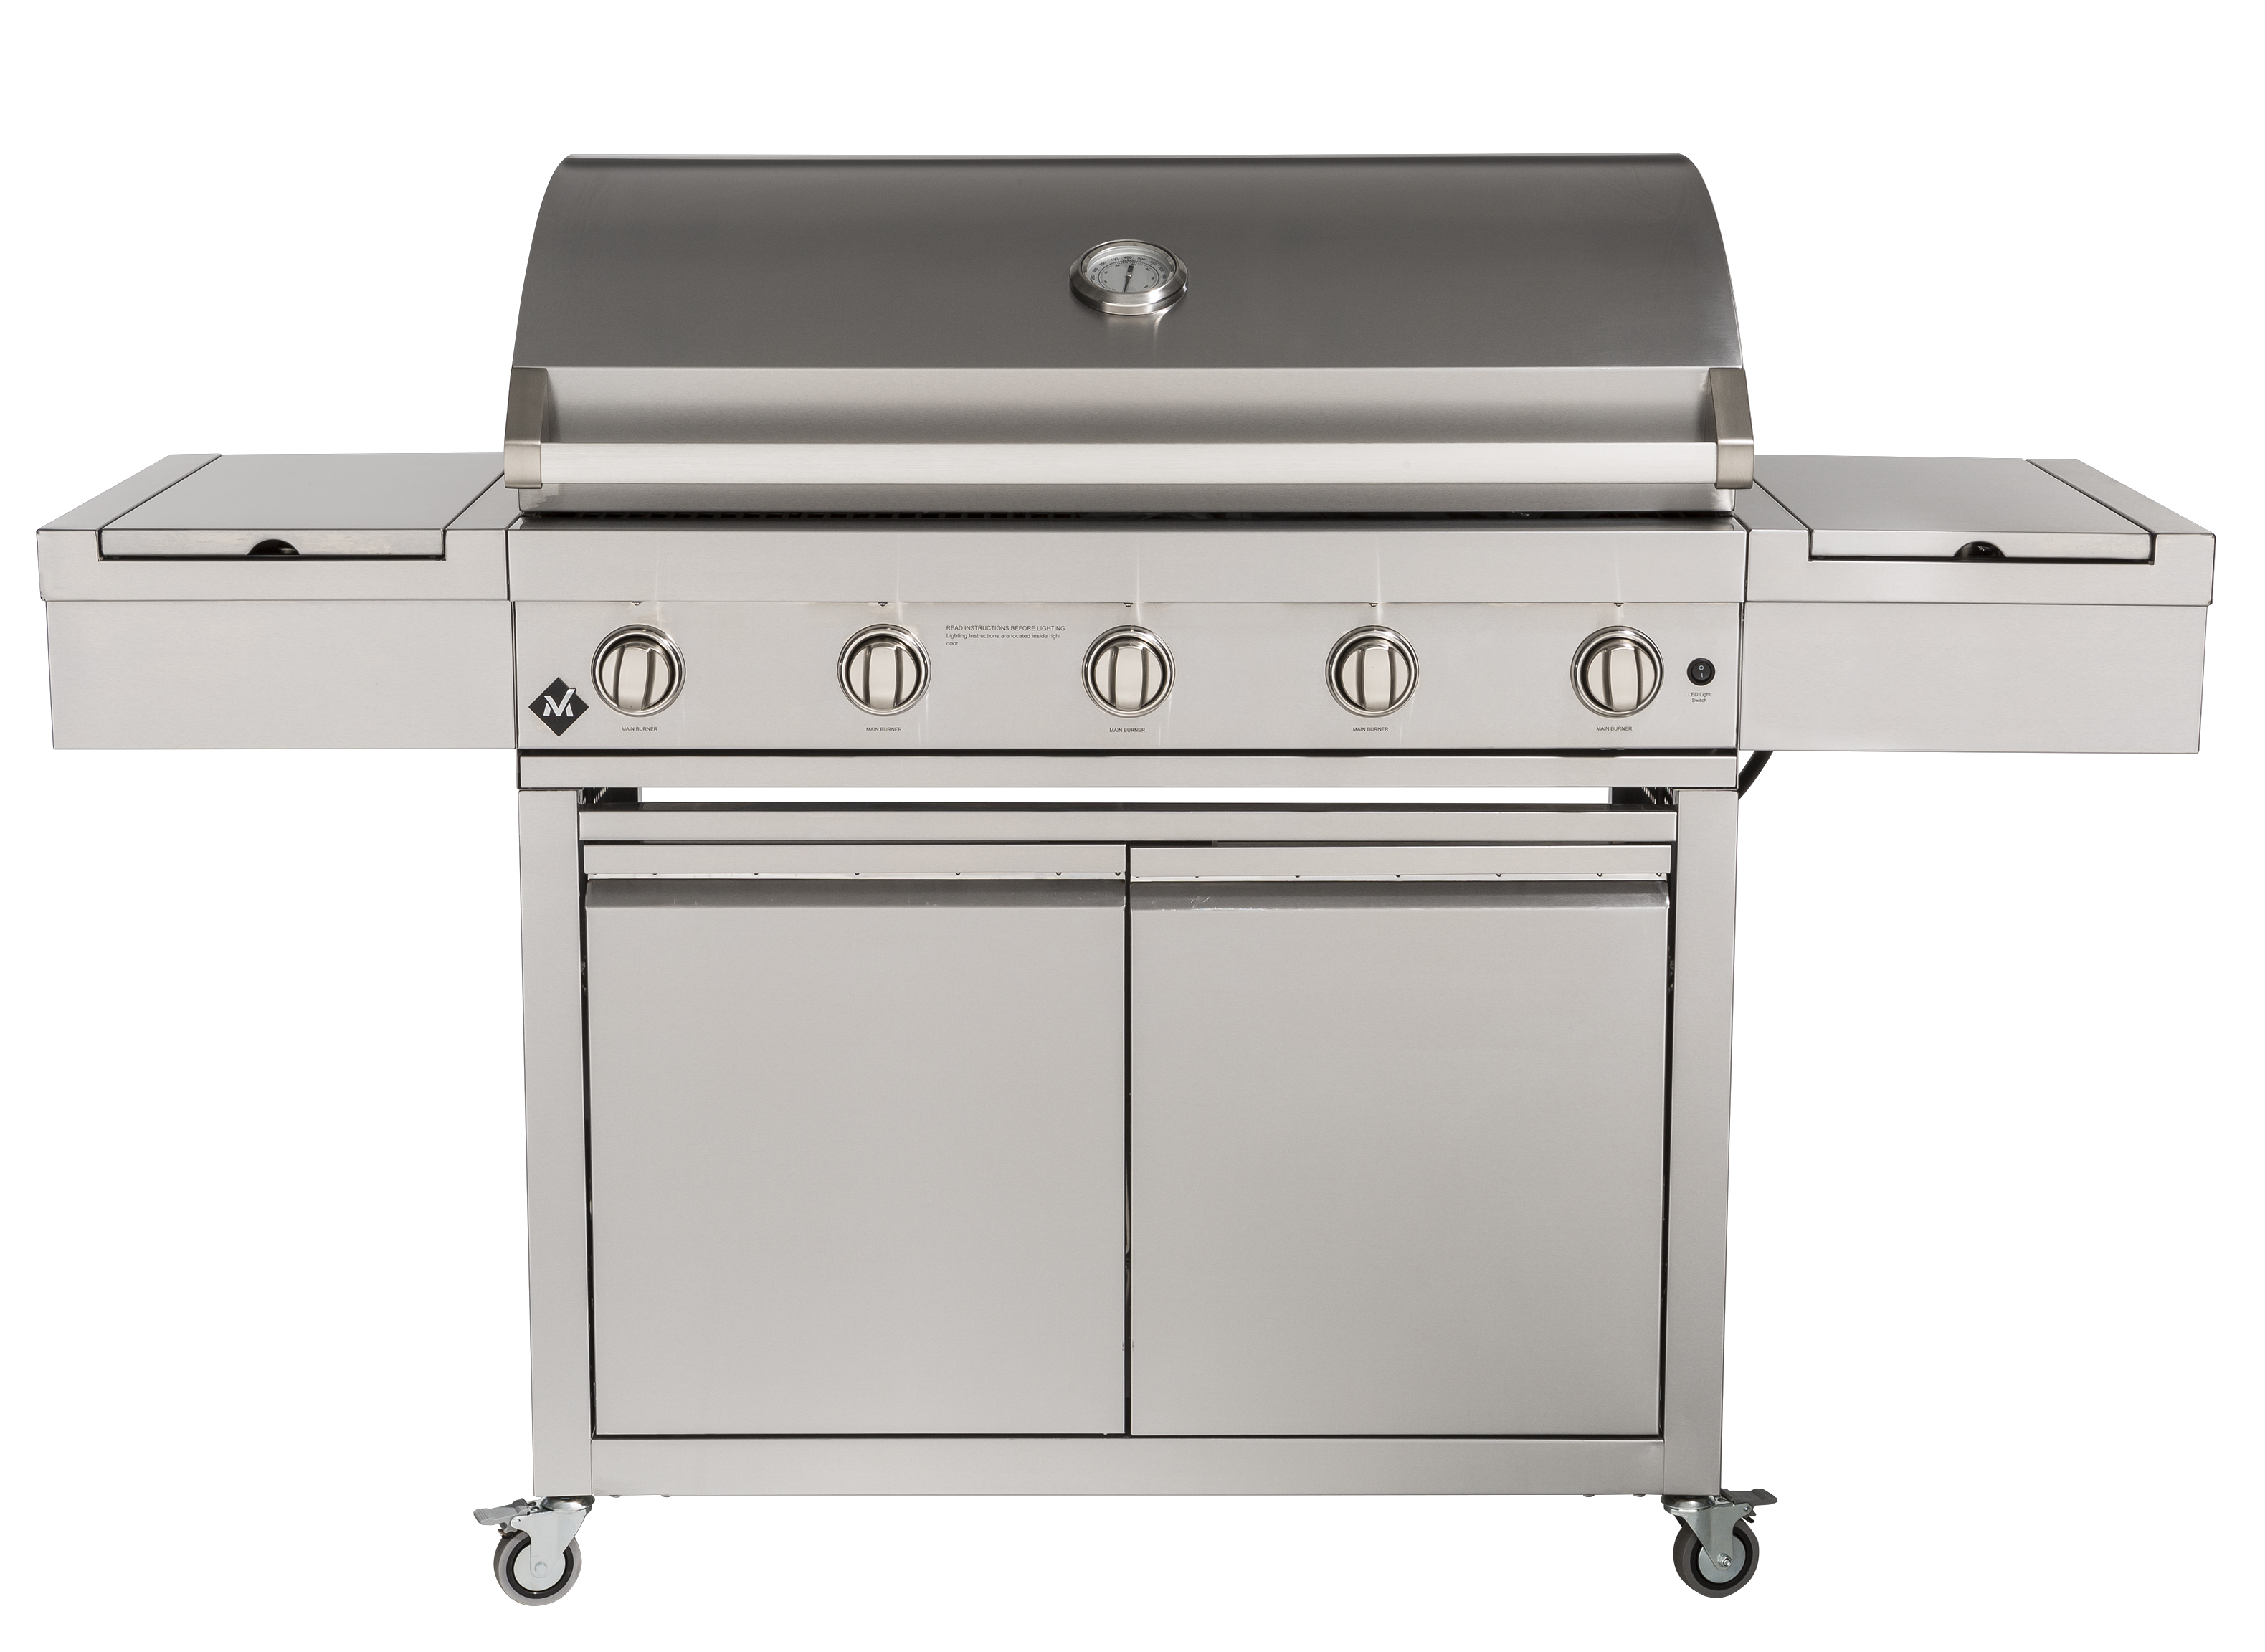 Member's Mark GT Elite GT05SIR-SB-LP (Sam's Club) Grill Review - Consumer  Reports